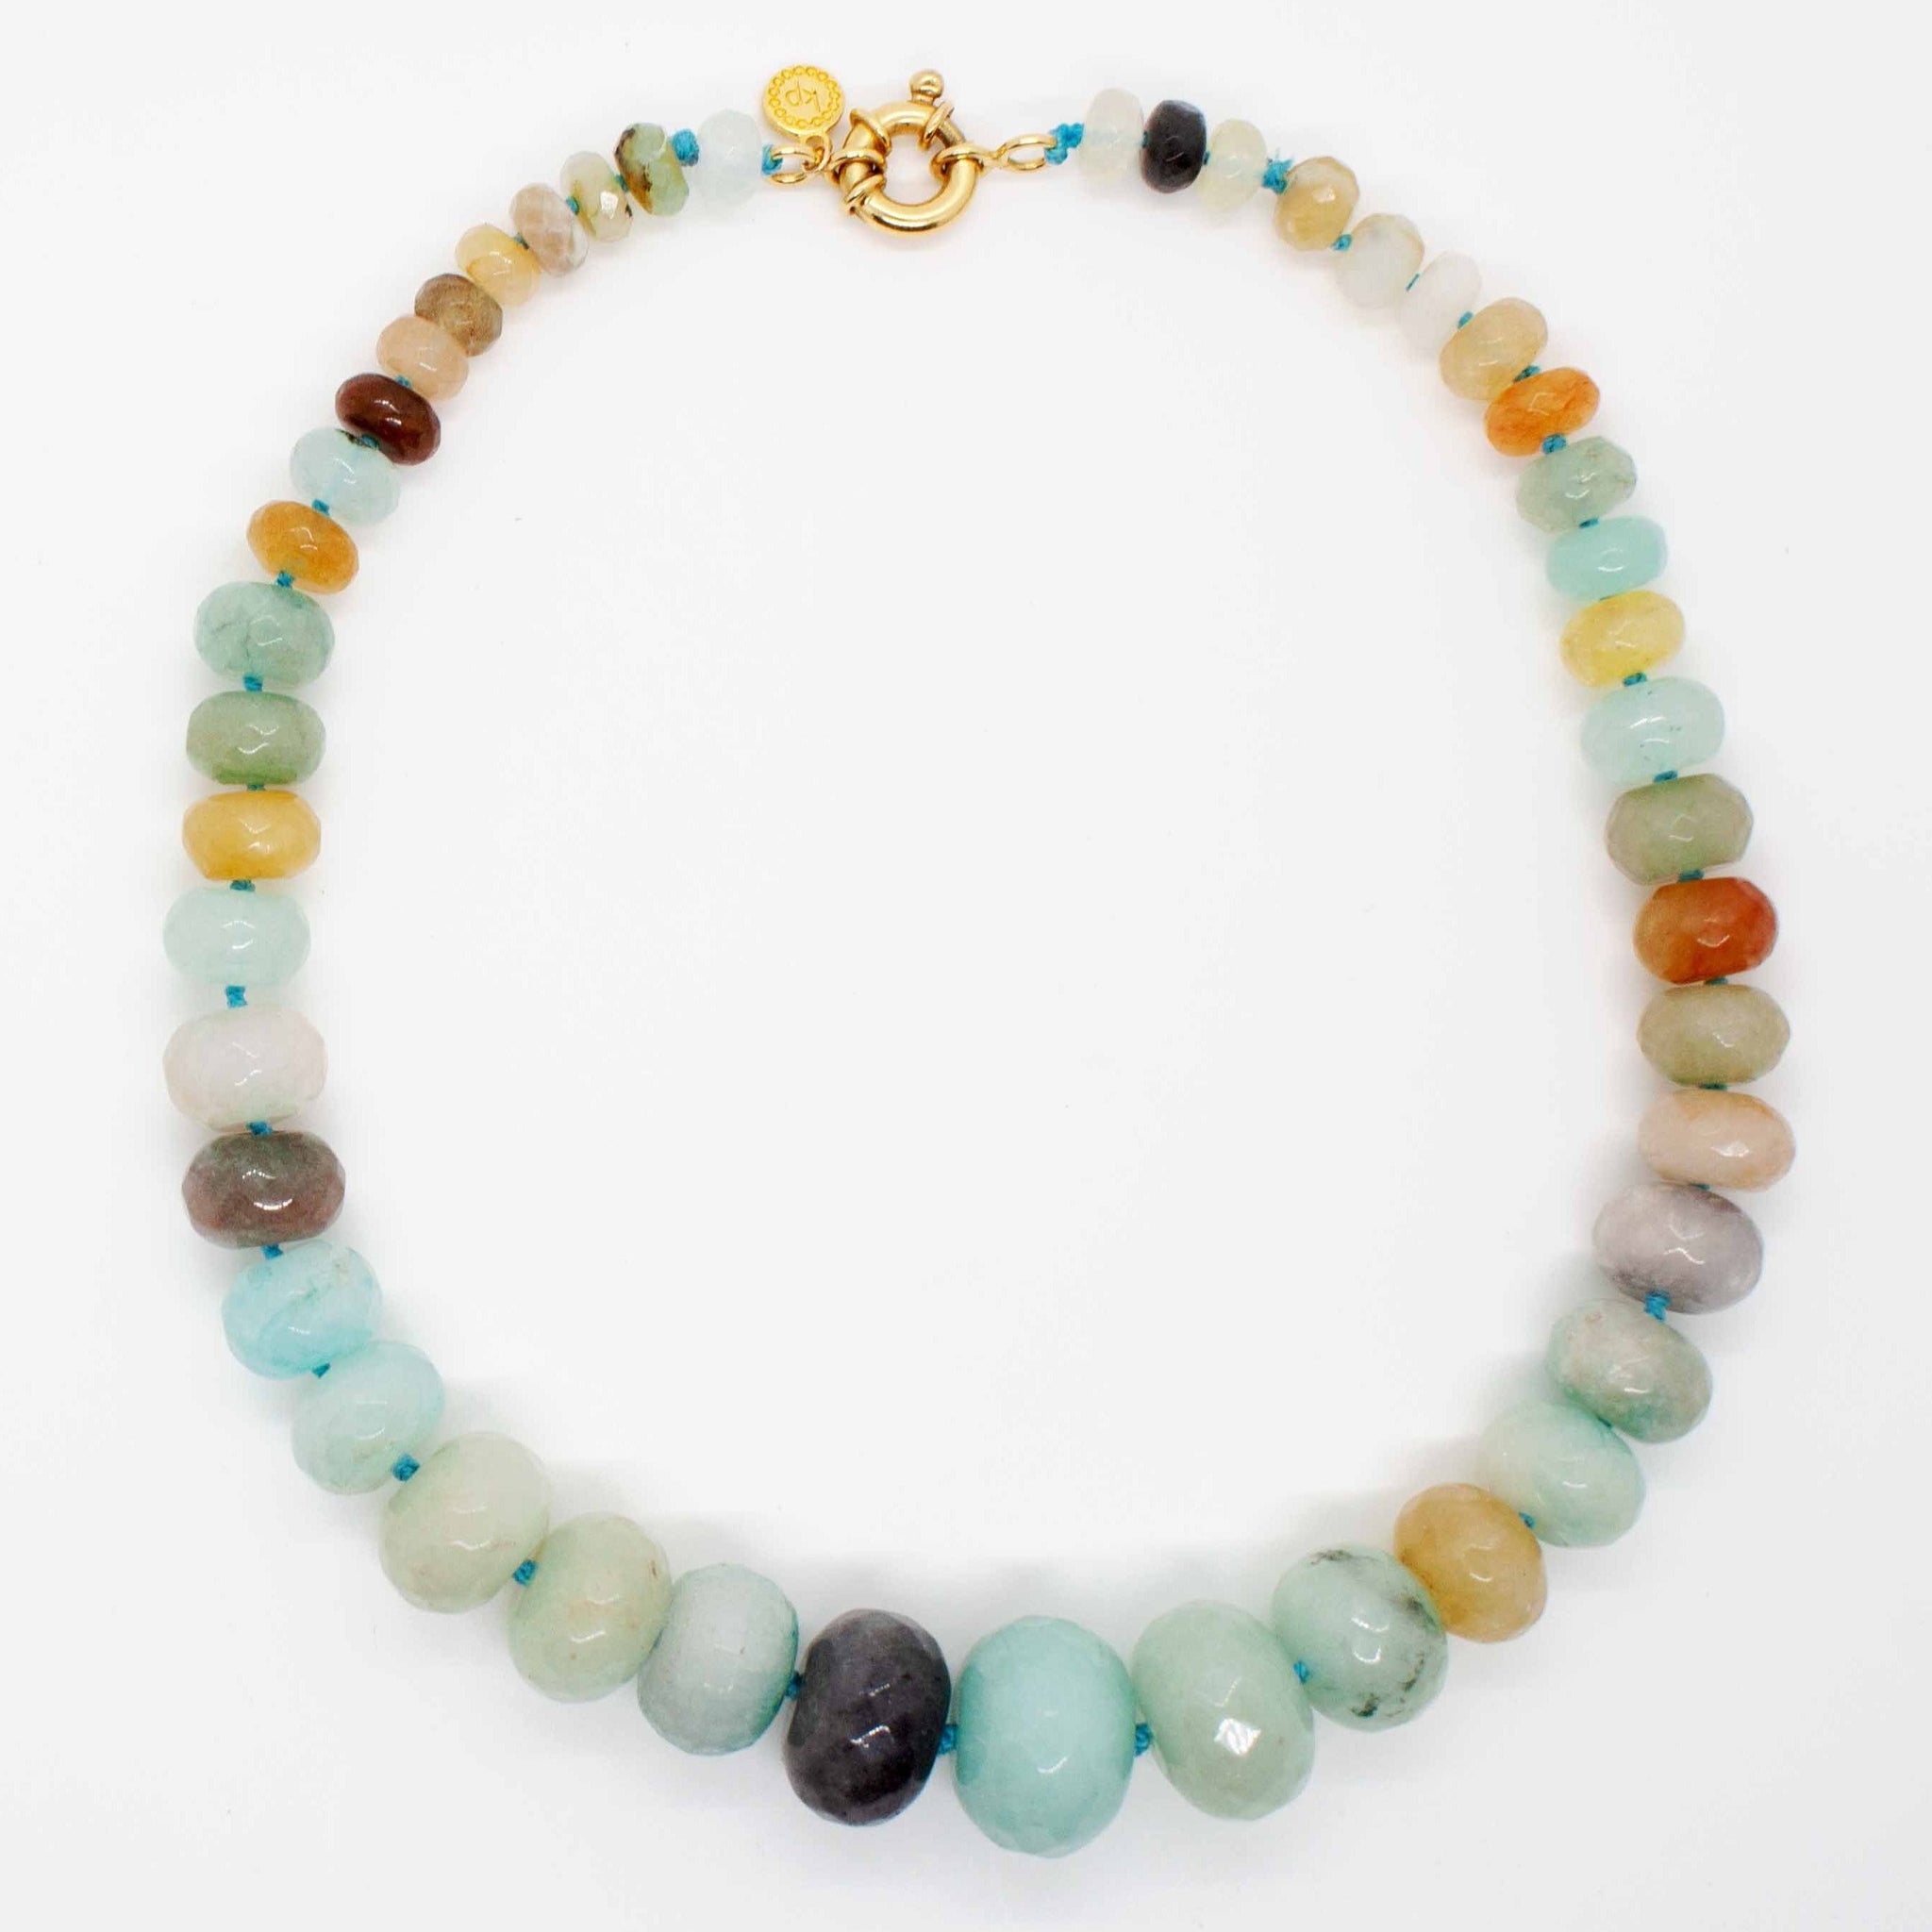 16 inch one-of-a-kind hand knotted jade necklace with gold filled spring ring clasp.